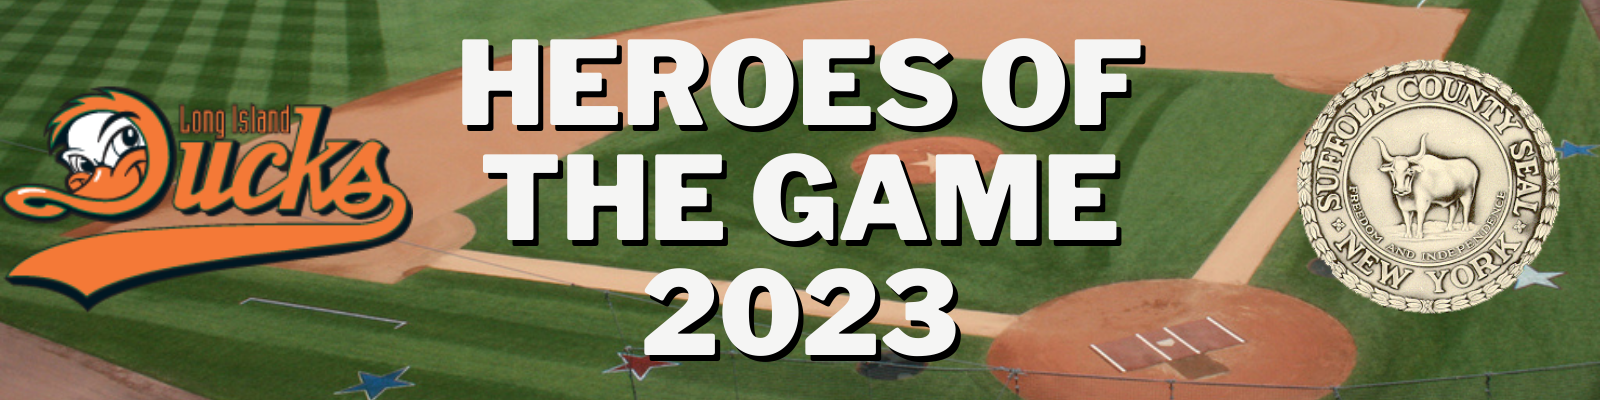 Heroes of the Game Banner 2023